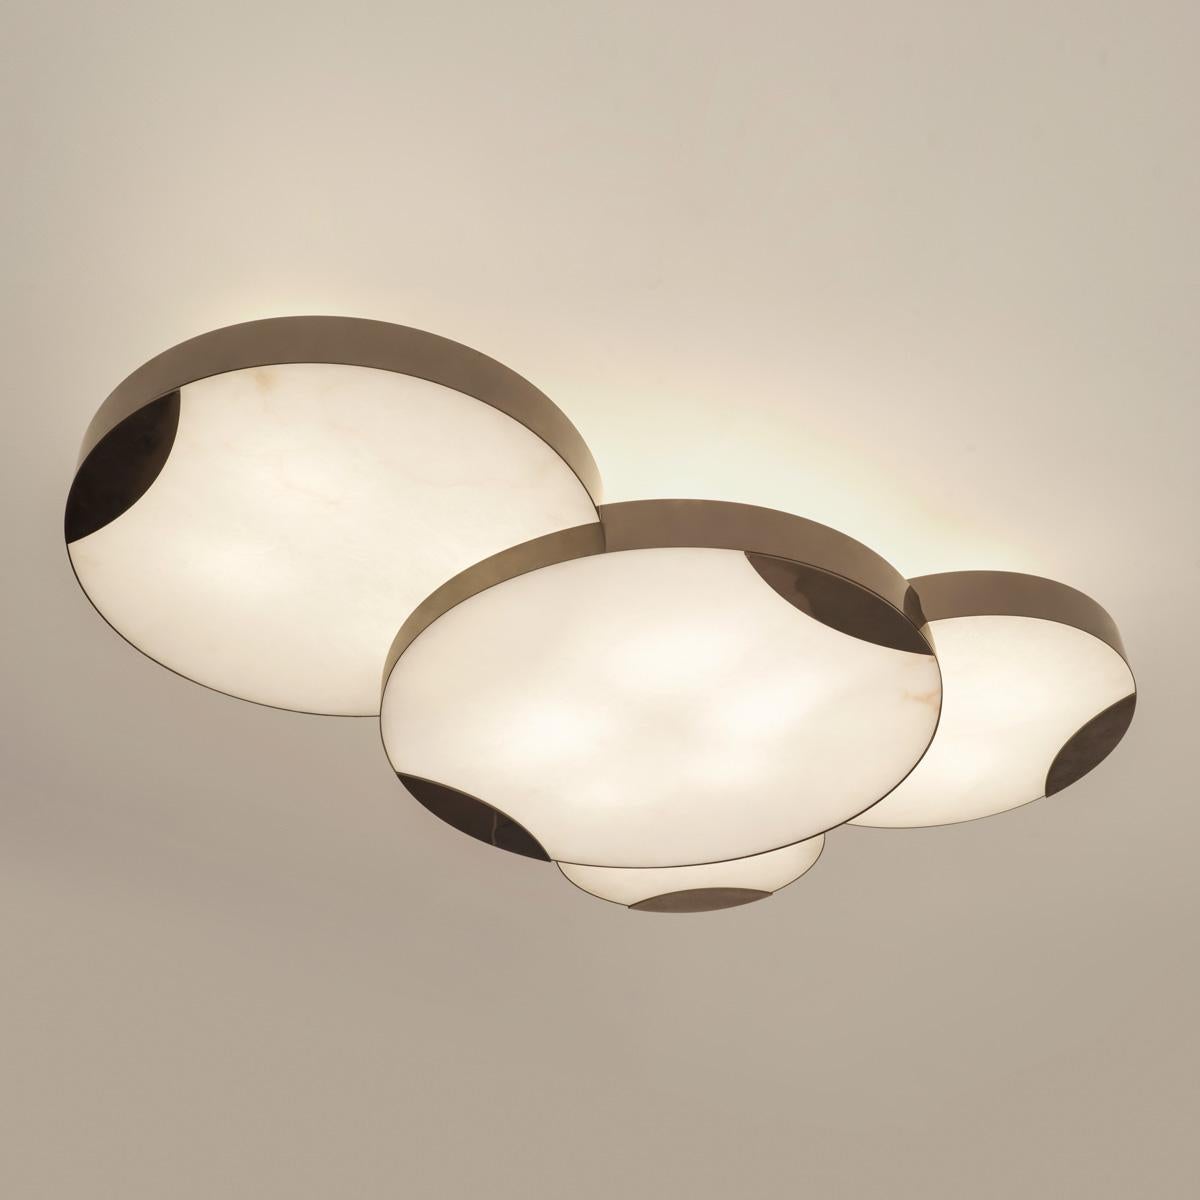 Cloud N.4 Ceiling Light by Gaspare Asaro-Peltro Finish In New Condition For Sale In New York, NY